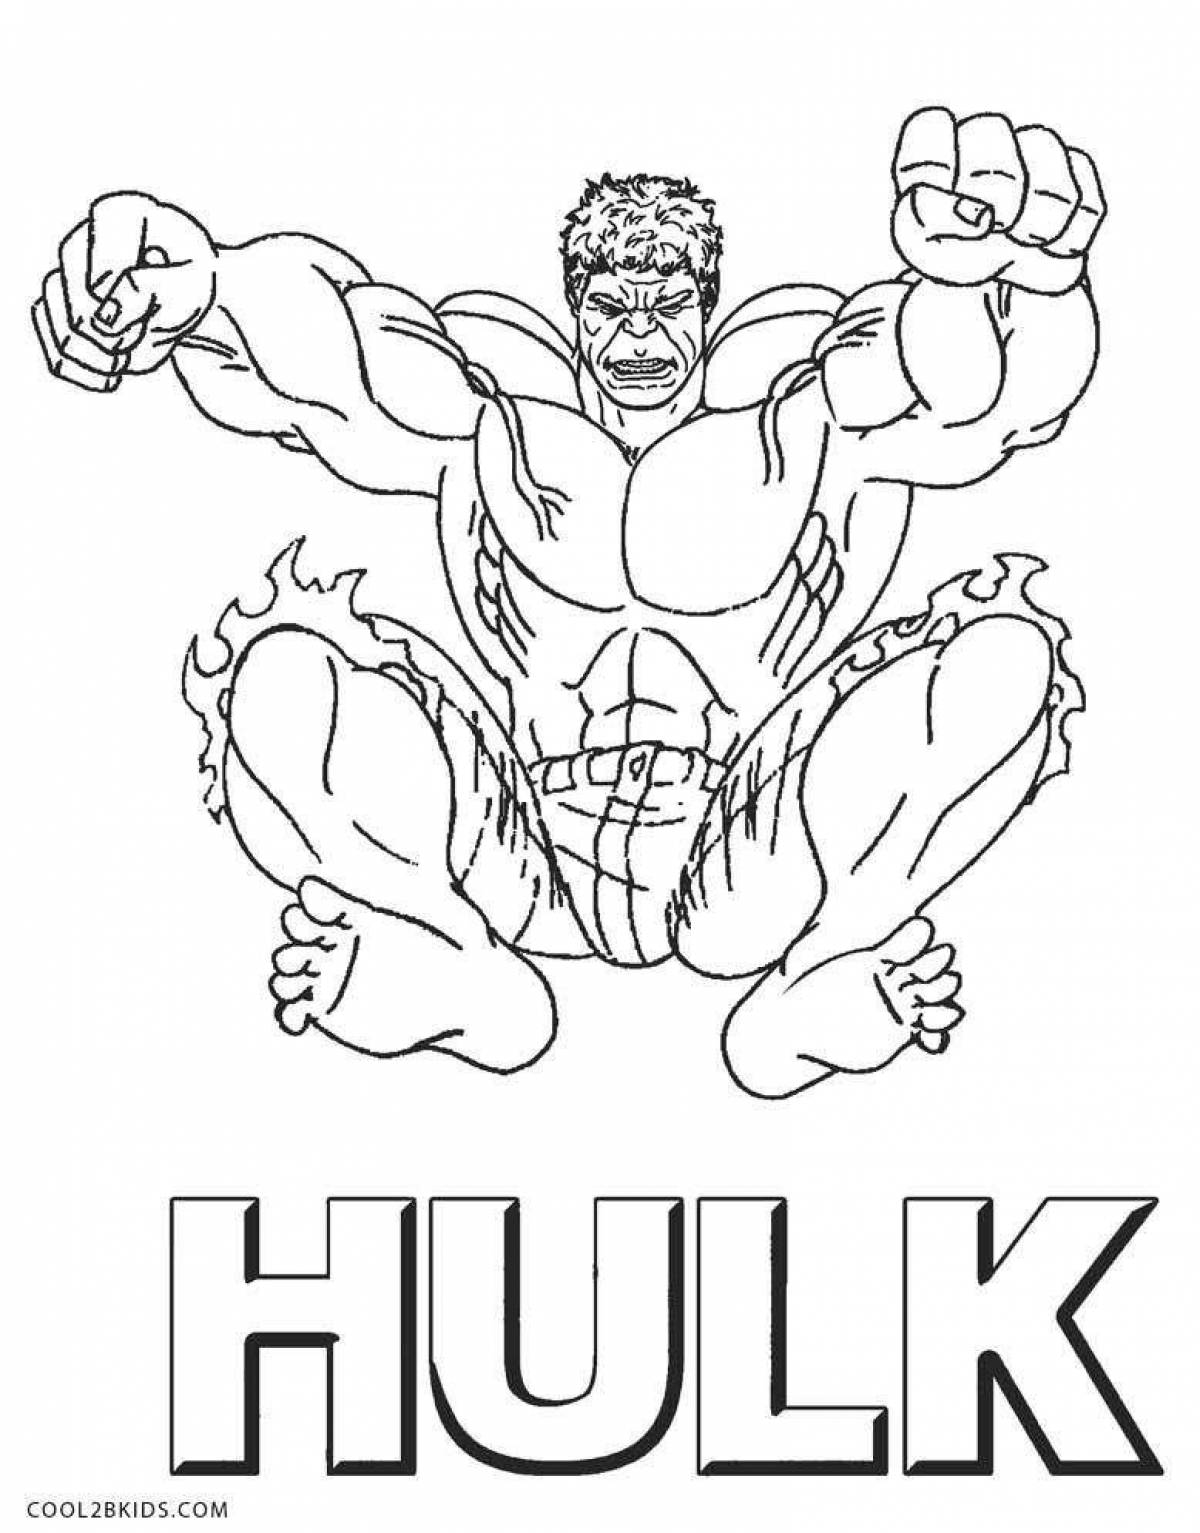 Hulk for kids 6 7 years old #1